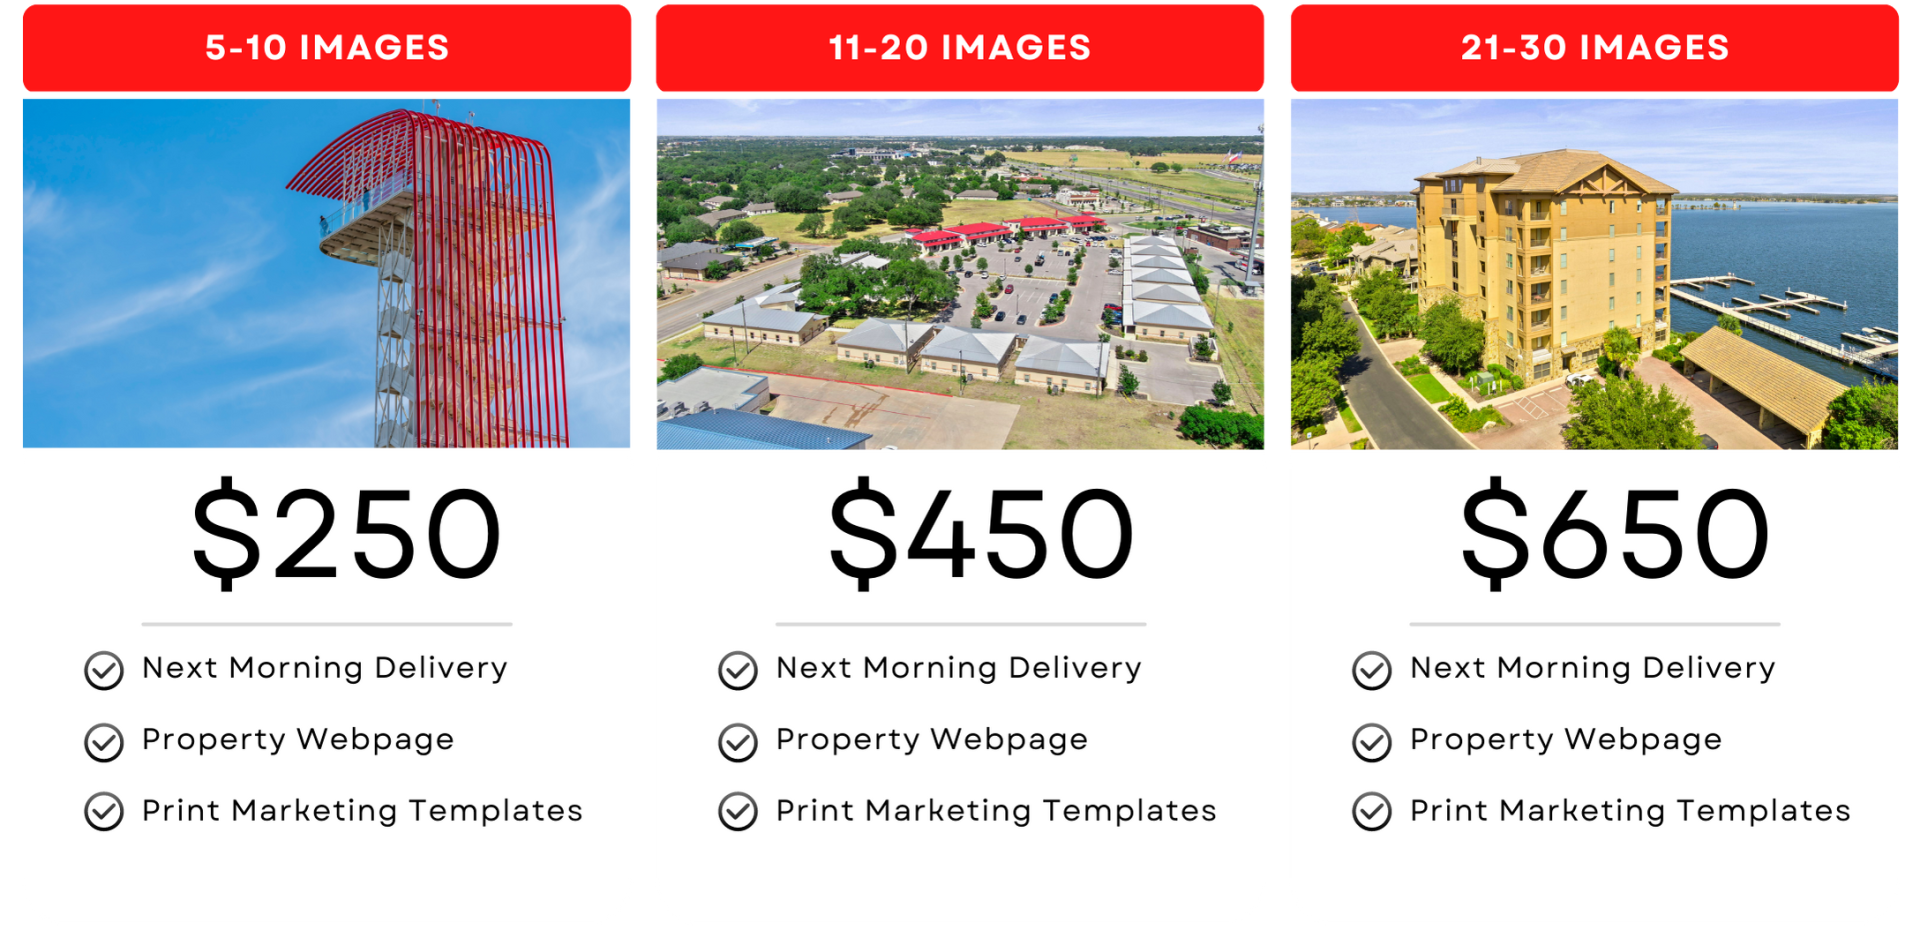 Real Estate Photography Pricing